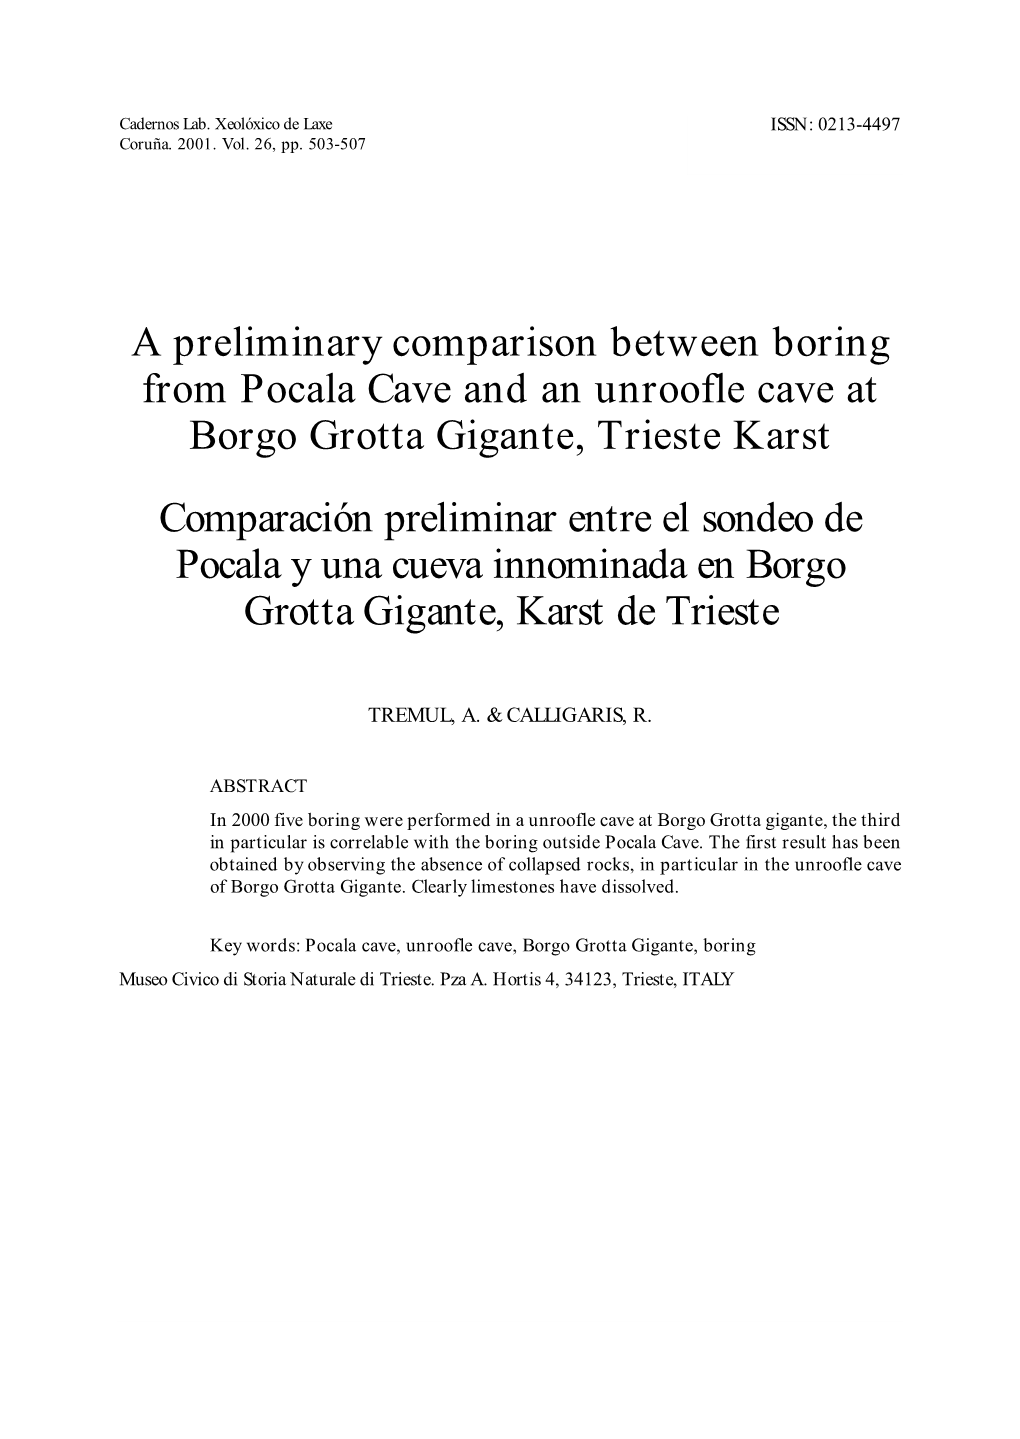 A Preliminary Comparison Between Boring from Pocala Cave and an Unroofle Cave at Borgo Grotta Gigante, Trieste Karst